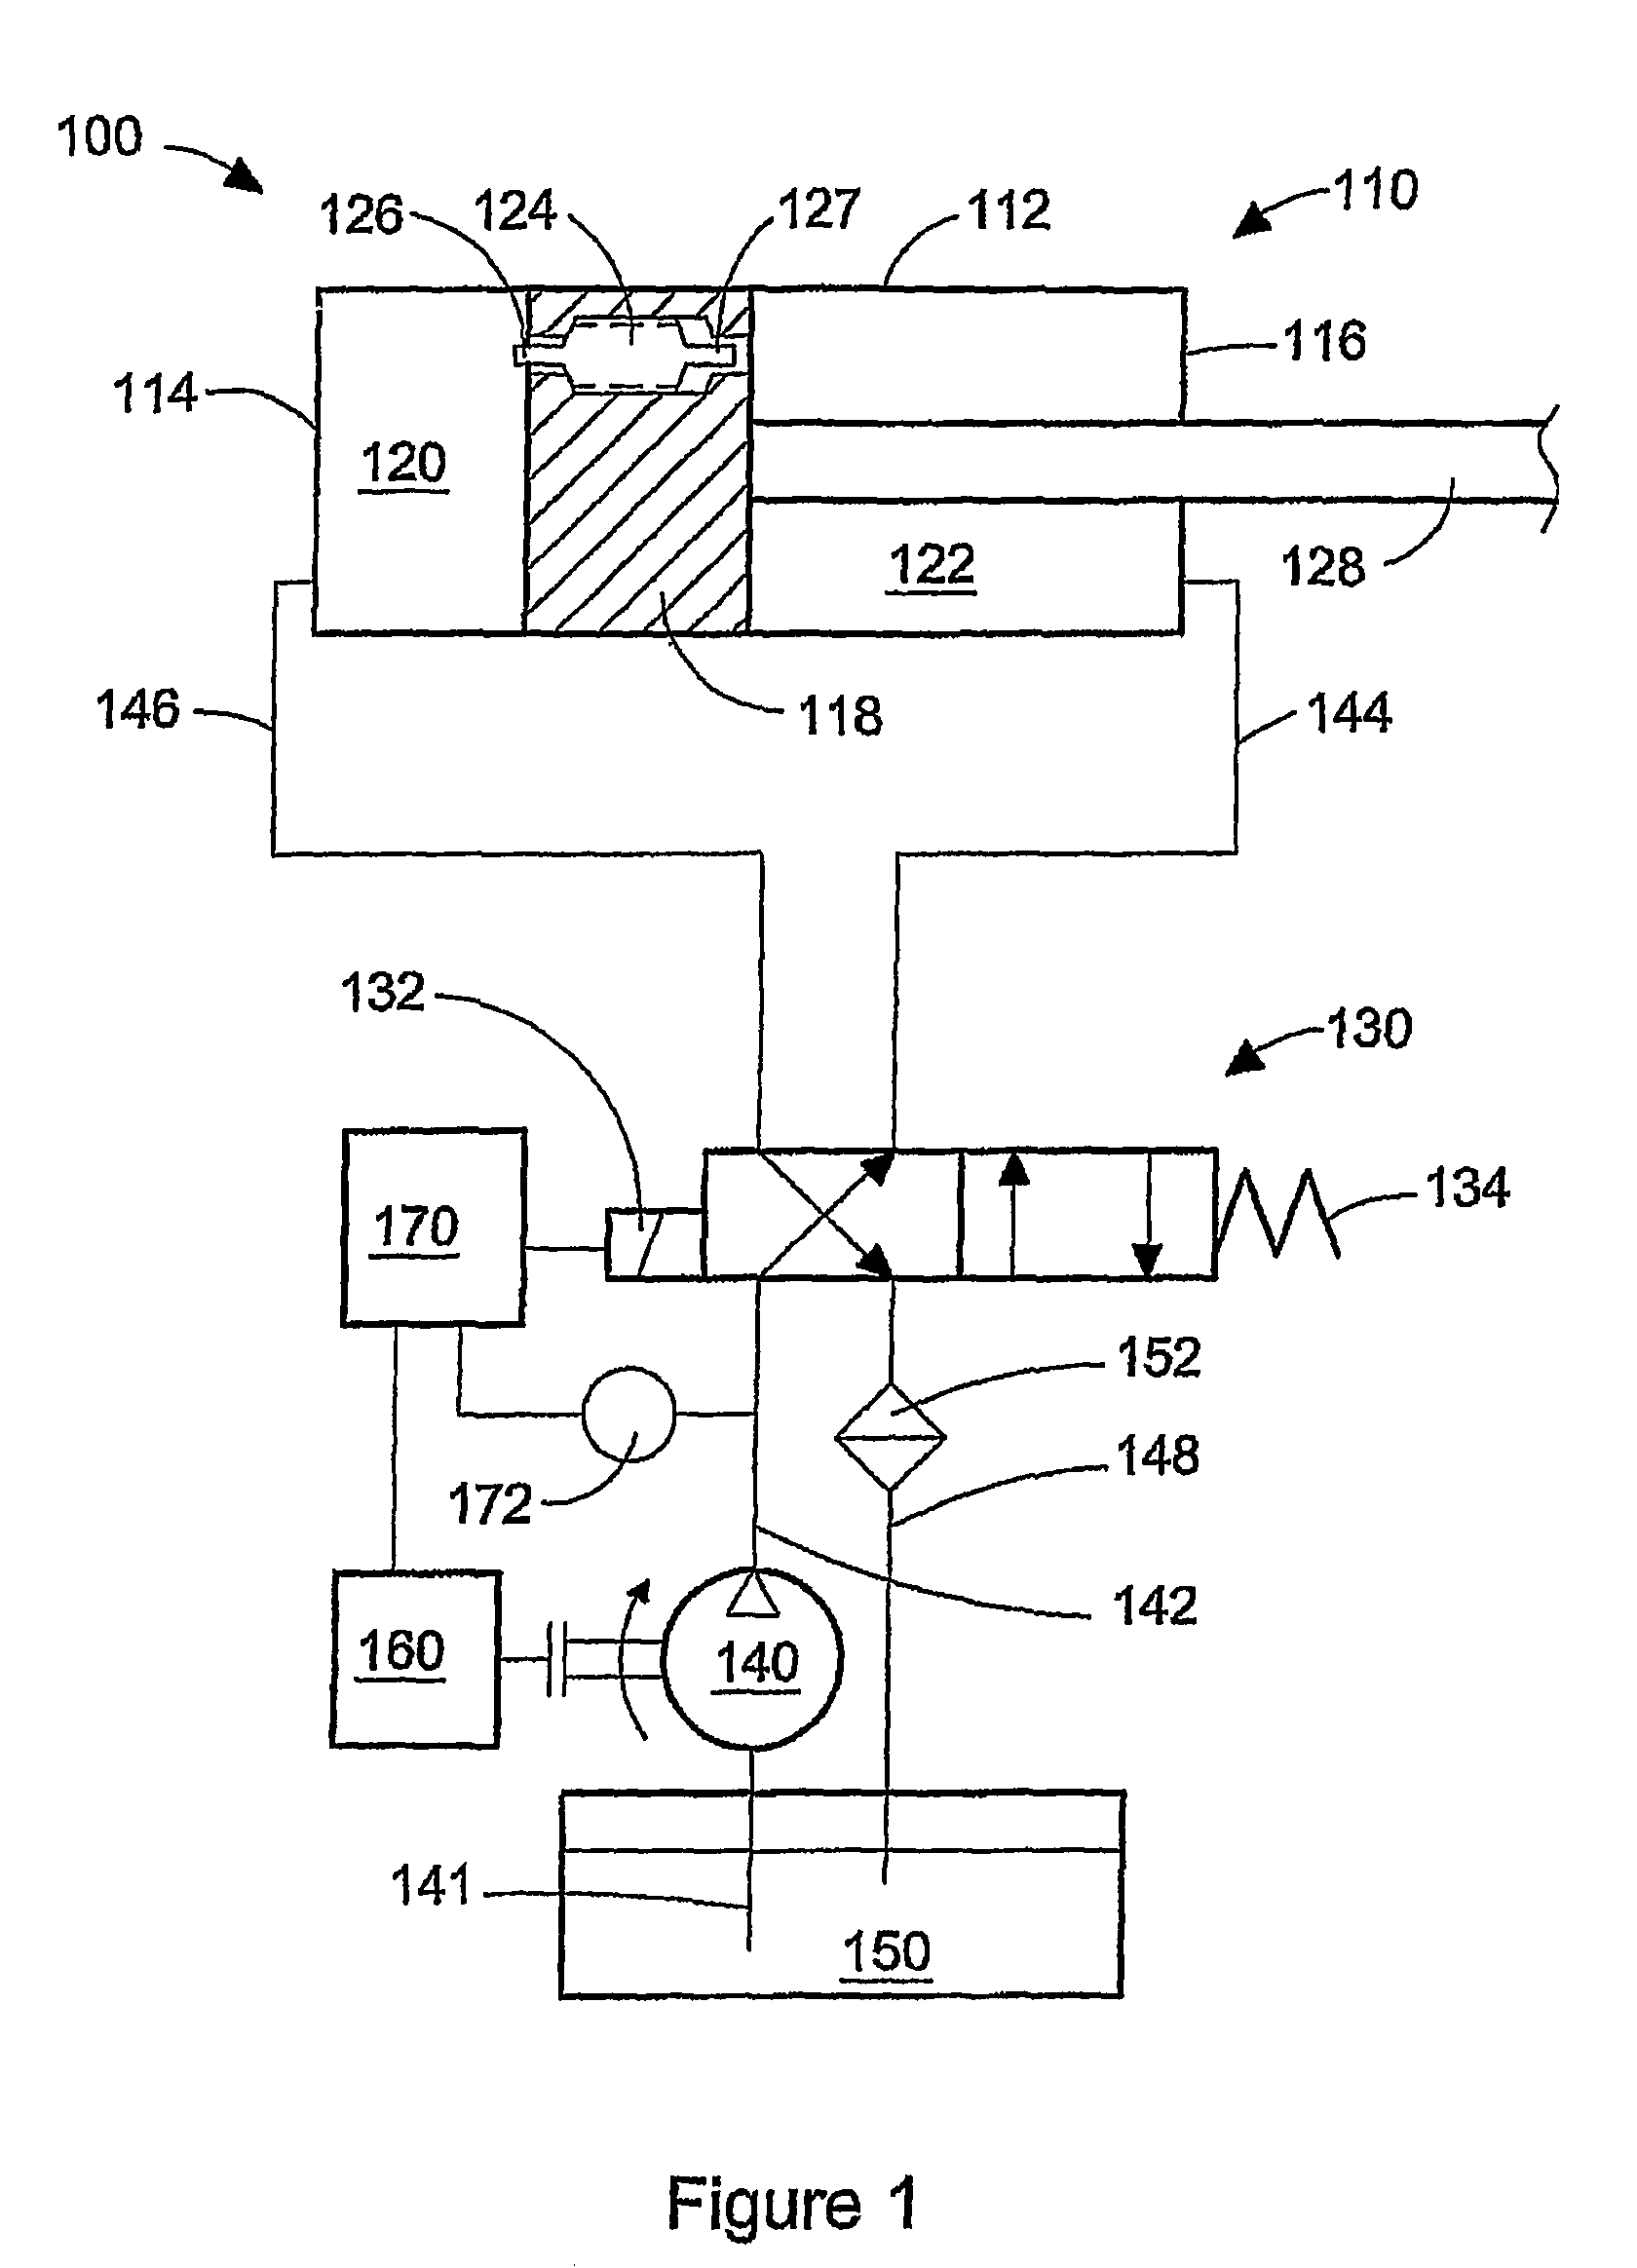 Hydraulic drive system and method of operating a hydraulic drive system